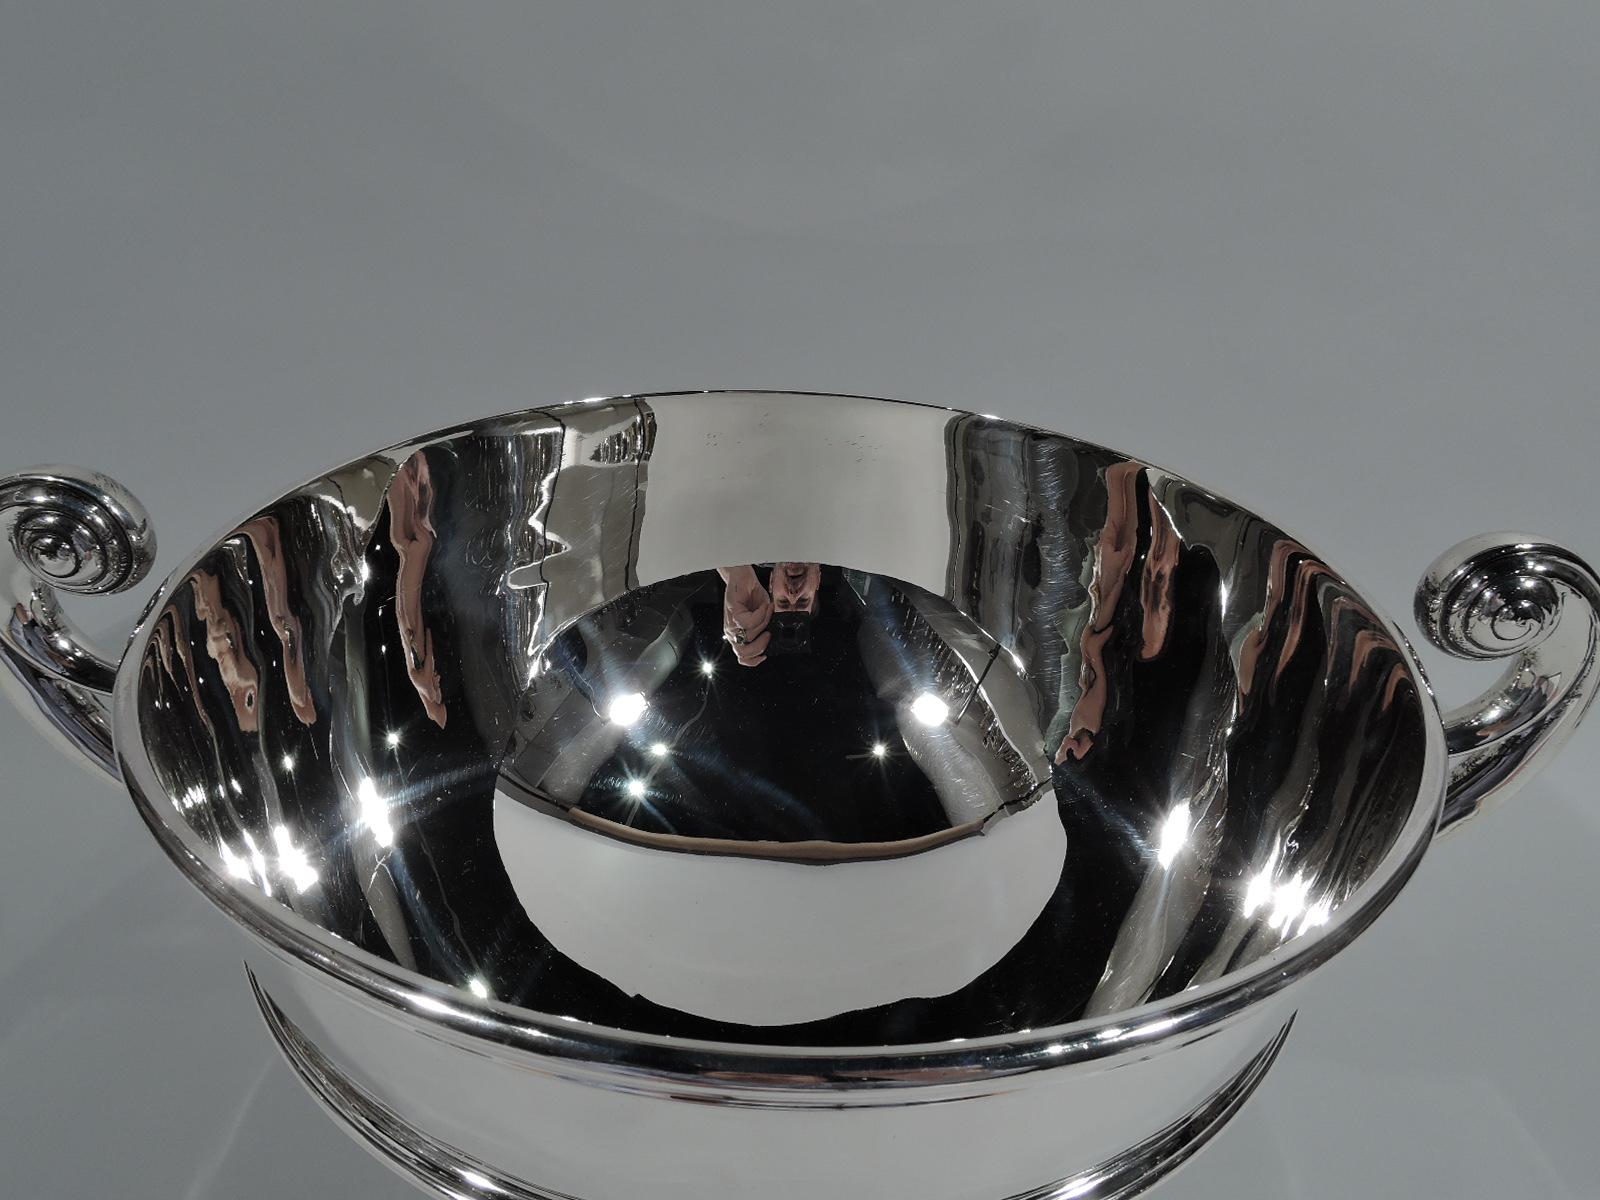 Large Edwardian Classical sterling silver trophy bowl. Made by Durgin (part of Gorham) in Concord, New Hampshire, ca 1900. Round and girdled bowl with capped and flying double-scroll handle, molded rim, and stepped foot. Substantial with nice heft